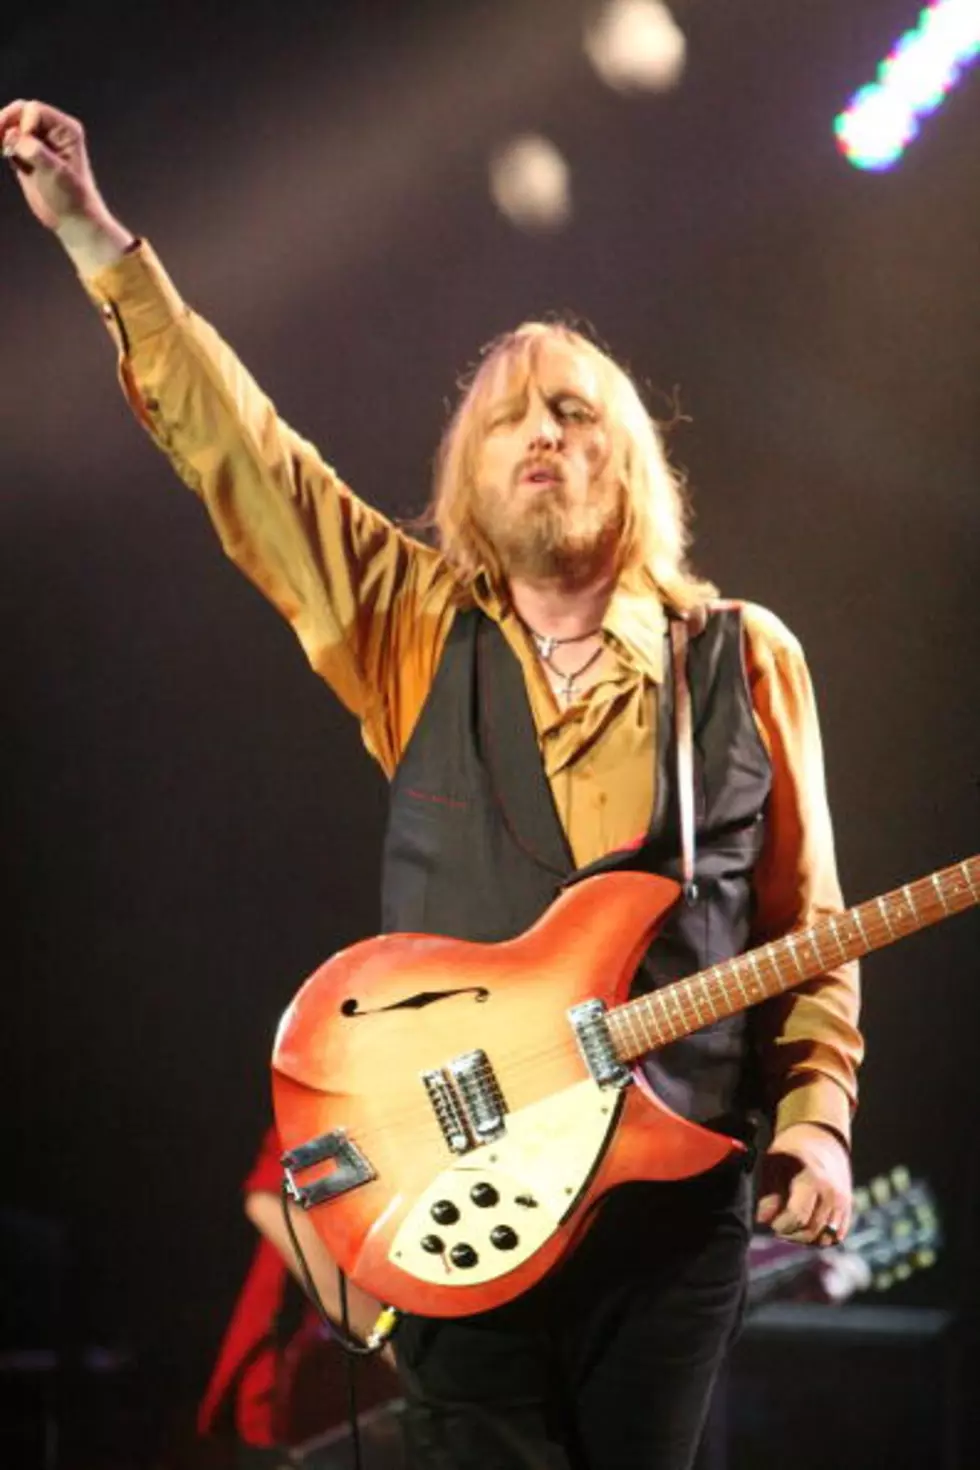 Take A Listen To The New Tom Petty And The Heartbreakers Single [Audio]